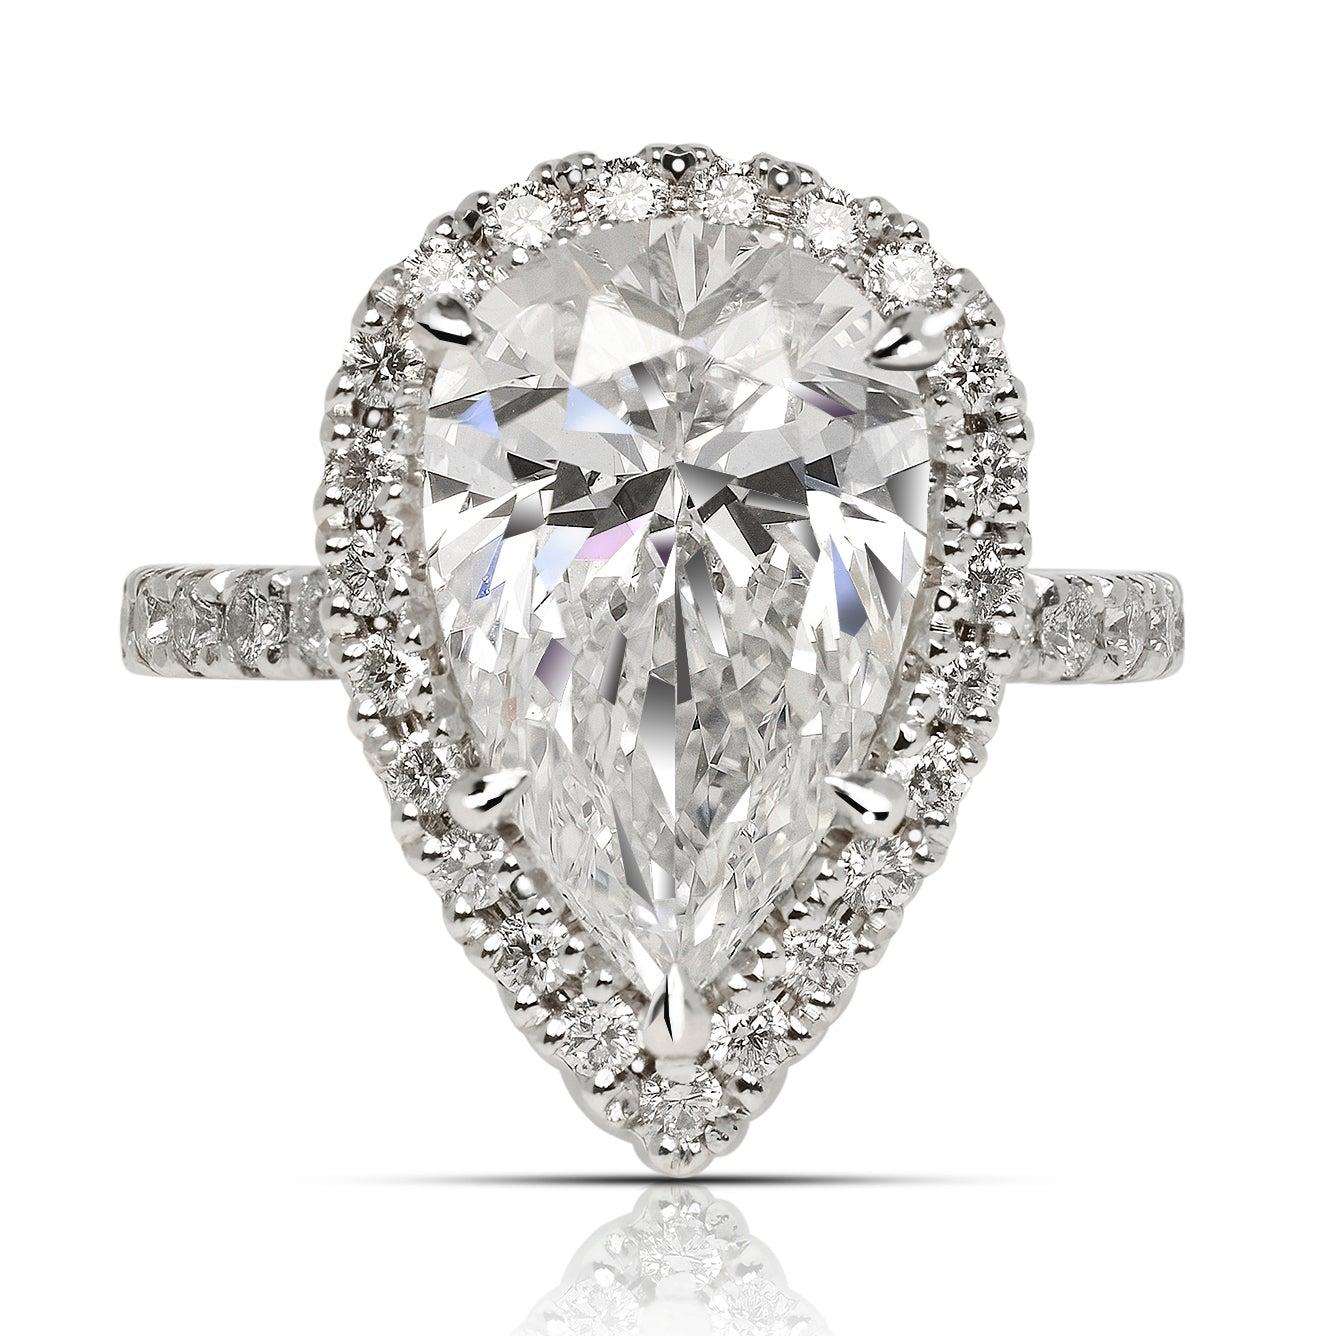 BELLA PEAR SHAPED DIAMOND ENGAGEMENT RING BY MIKE NEKTA

GIA CERTIFIED

Center Diamond:
Carat Weight: 3 Carats
Color: D*
Clarity: VVS1
Style: PEAR BRILLIANT
Approximate Measurements: 12.9 x 8.2 x 5.1 mm
* This diamond has been treated by one or more